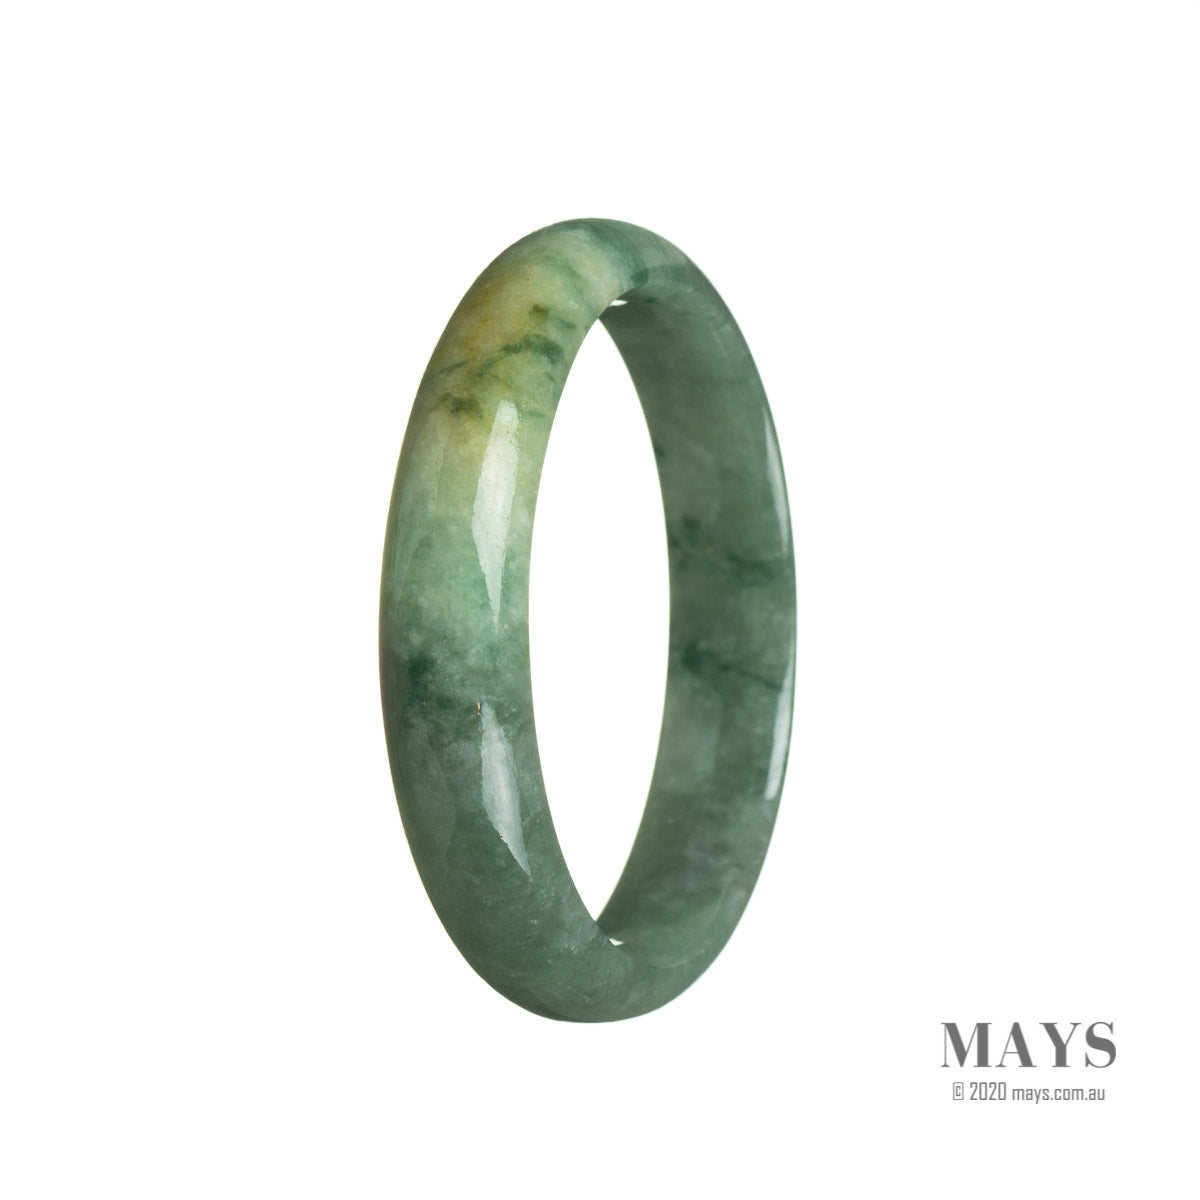 A close-up image of a half moon shaped green jade bracelet, with a glossy finish. The bracelet is made of genuine Type A green jade and measures 53mm in diameter. It is a beautiful piece of jewelry from MAYS GEMS.